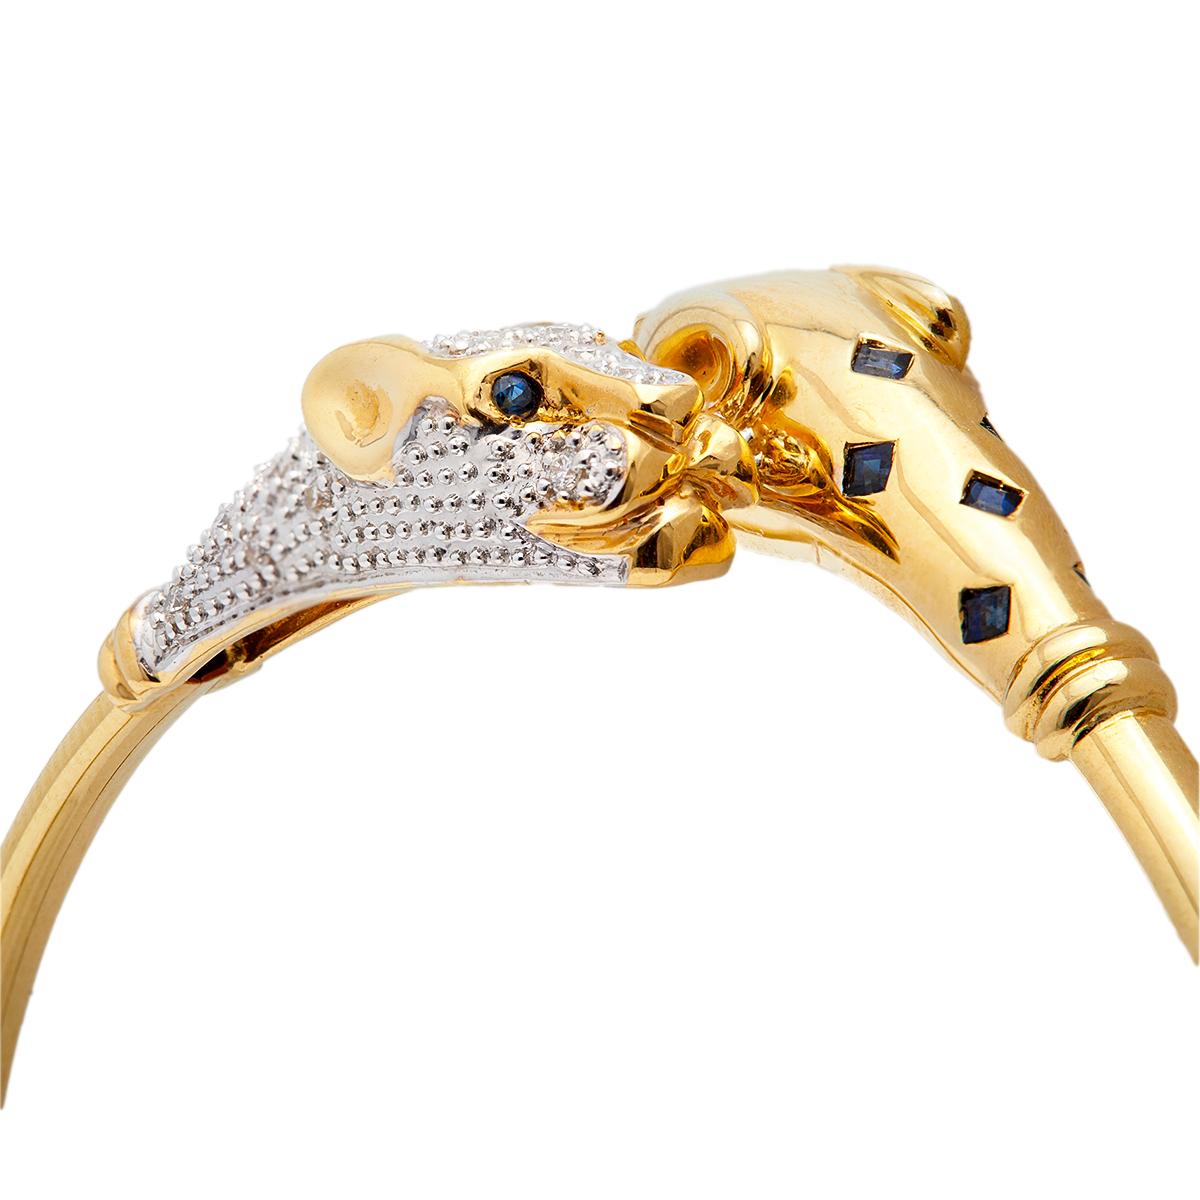 Women's or Men's Vintage Sapphire and Diamond 18k Yellow Gold Panther Cuff Bracelet